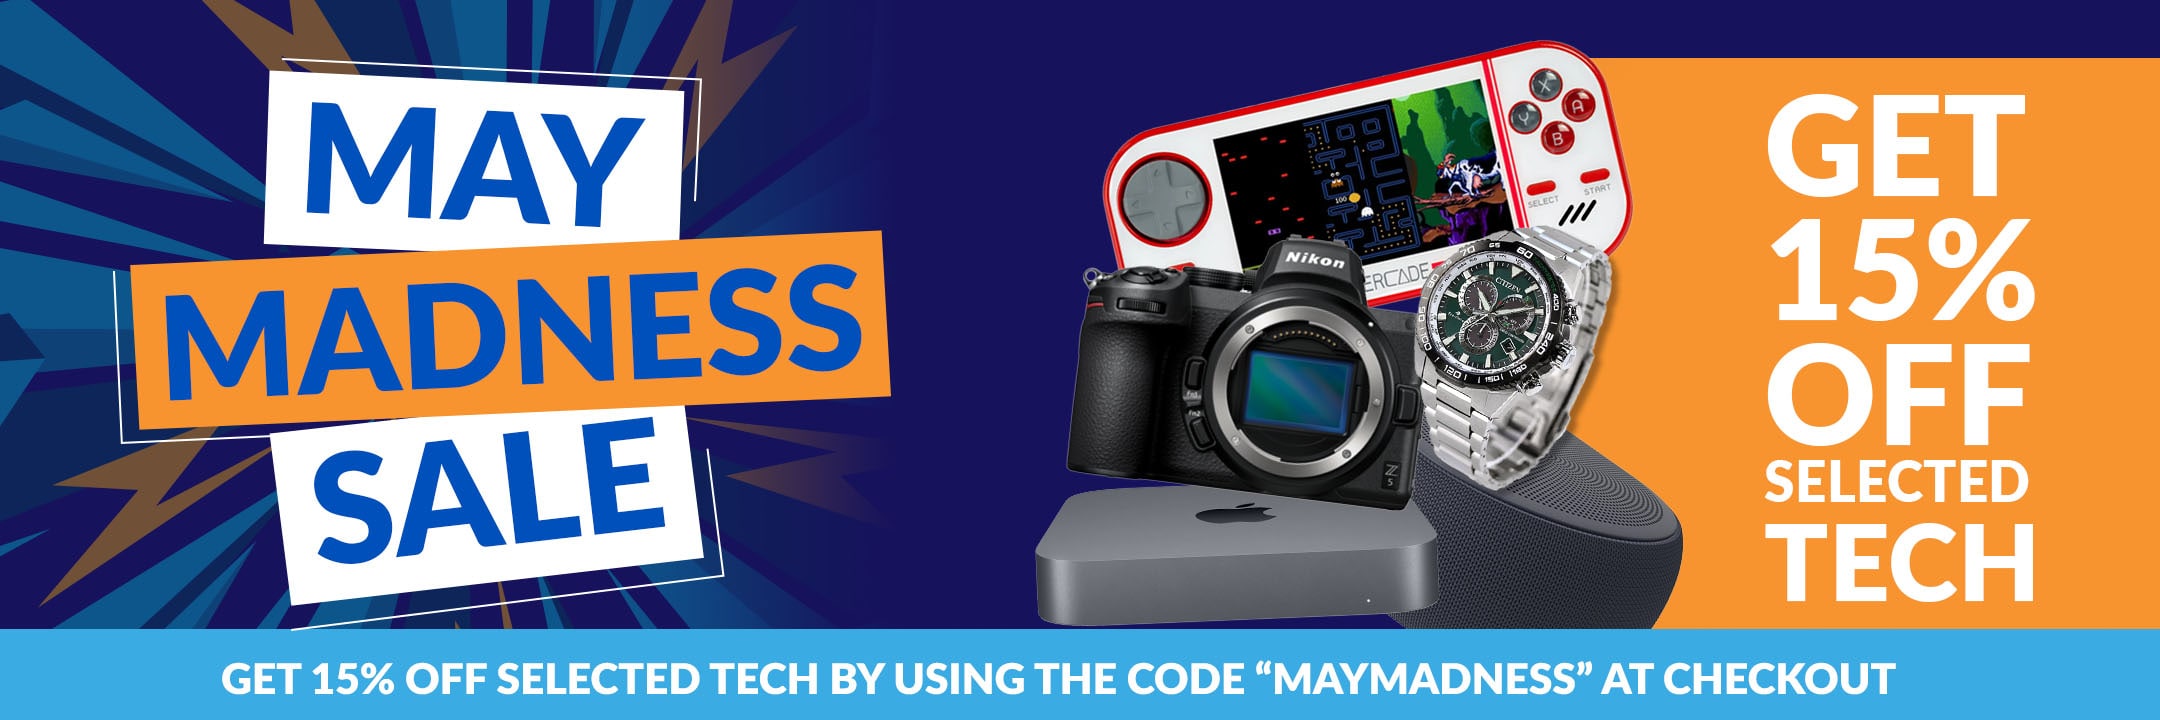 May Madness Sale - Get 15% Off Selected Tech